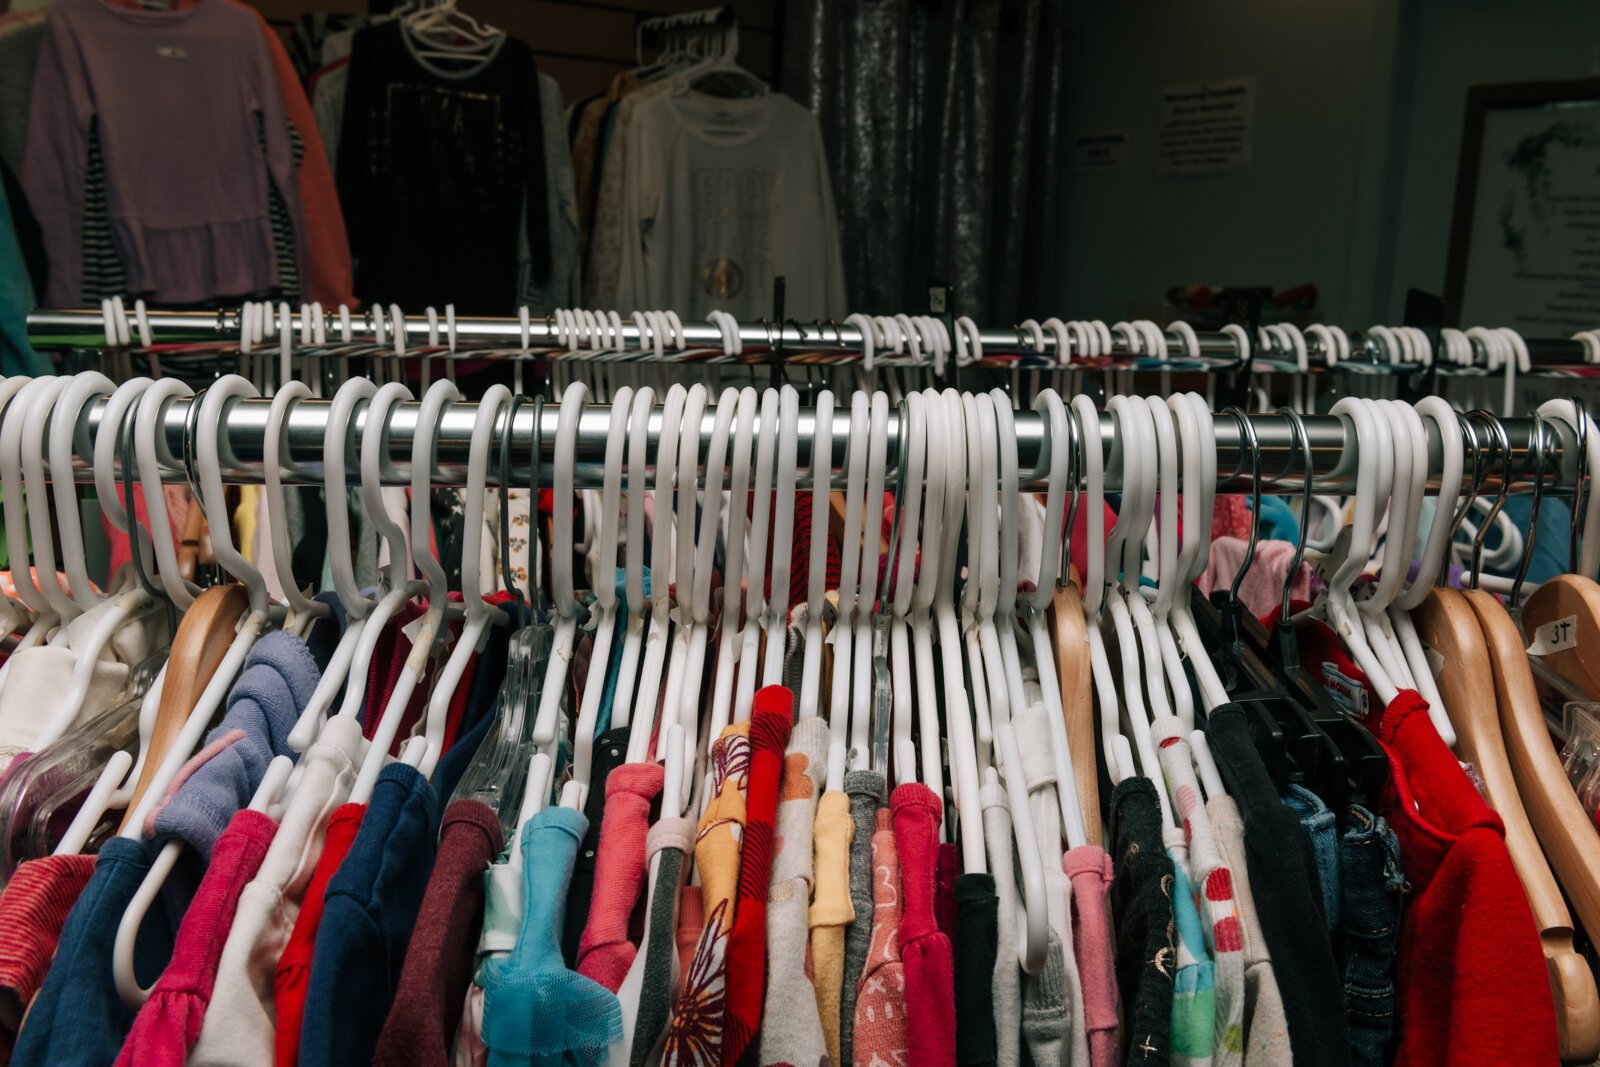 The Wellspring Shoppe's objective is to provide quality clothing to Allen County residents for everyday activities and also for job interviews, employment and social events.